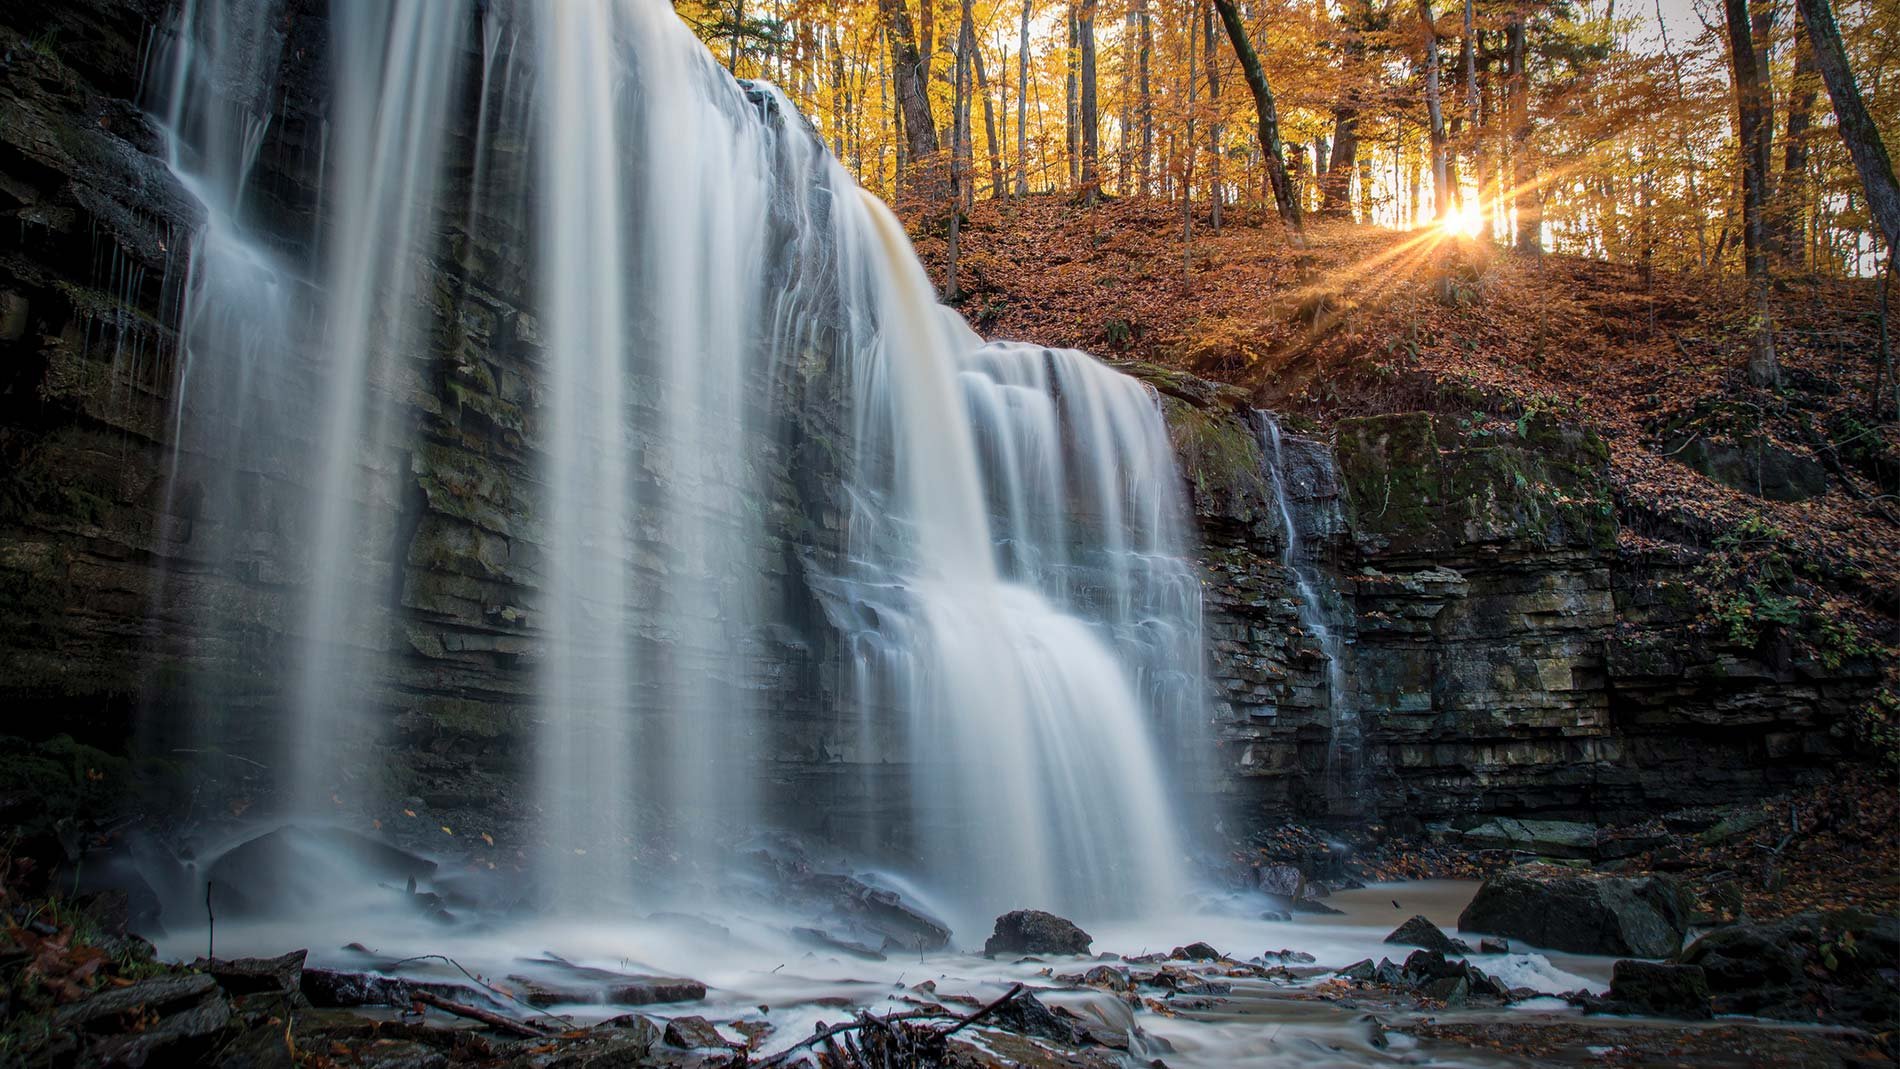 Day shot of waterfalls in the fall.